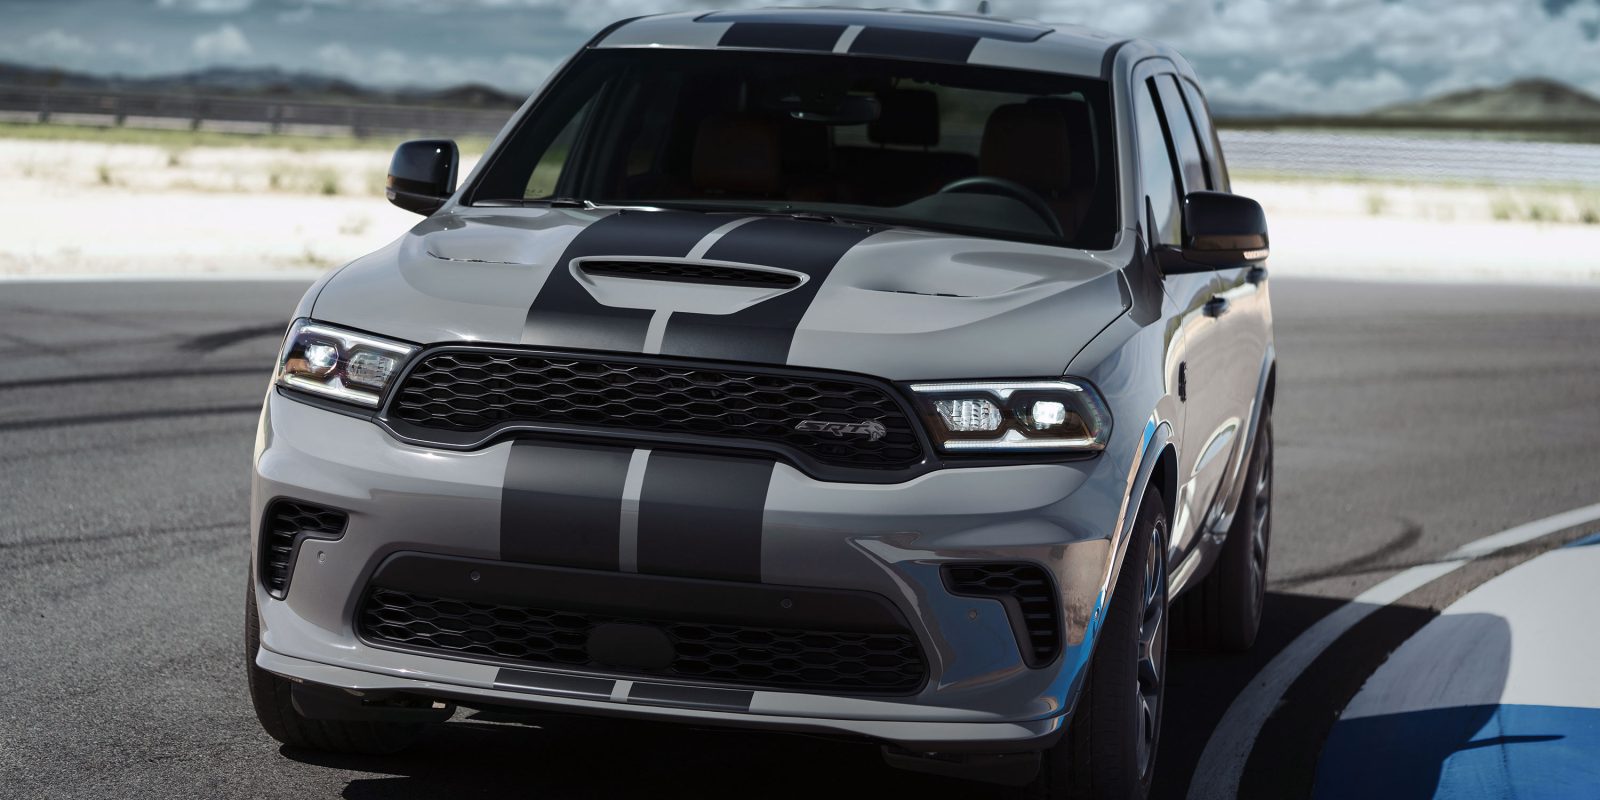 Dodge debuts 710horsepower V8 SUV but says Hellcat engines are doomed